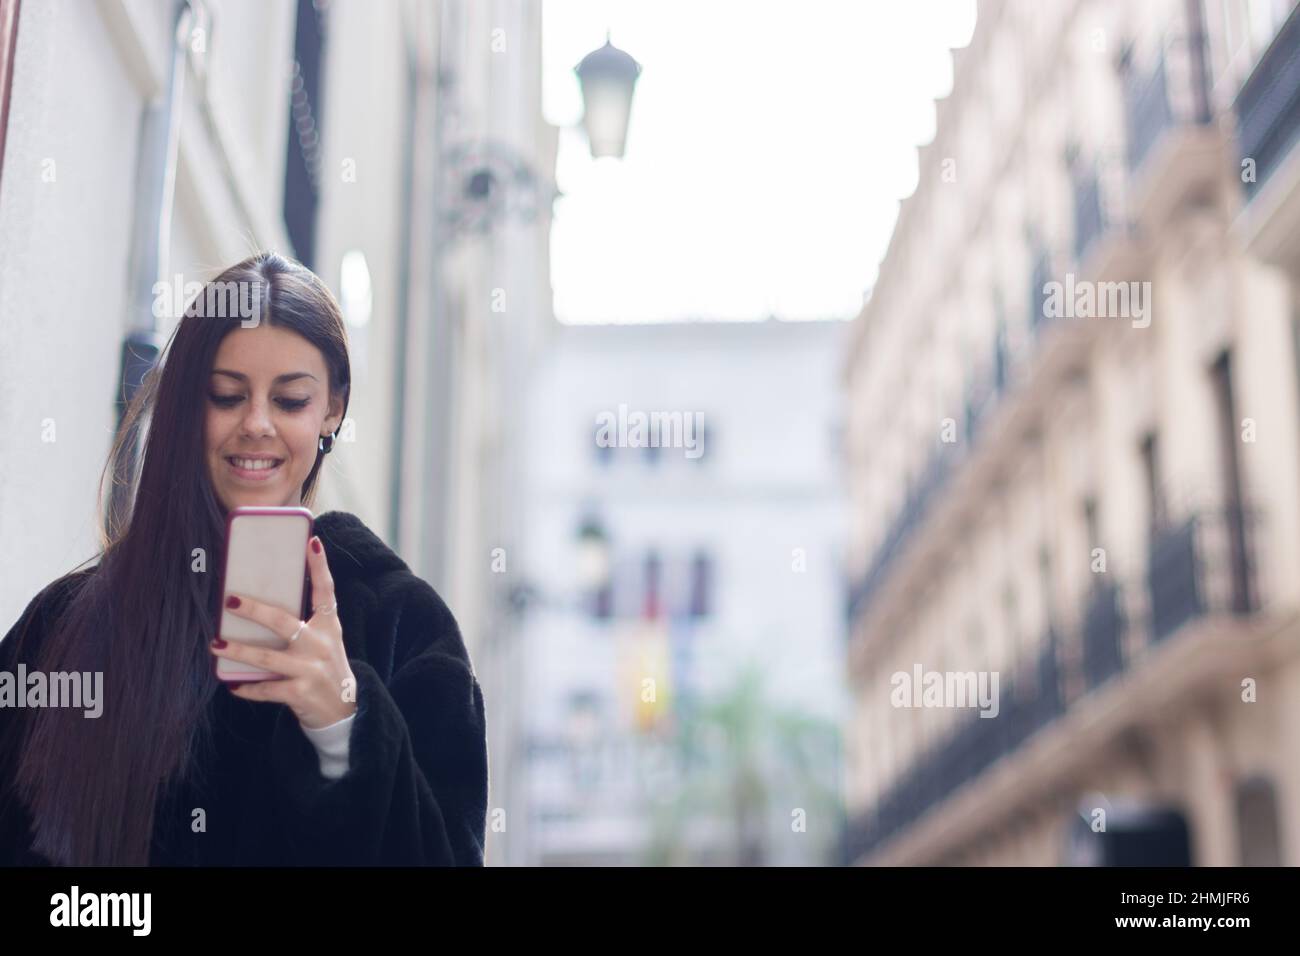 Smiling girl on the street in a black coat holding a mobile phone, typing messages or on a video call. With copy space Stock Photo